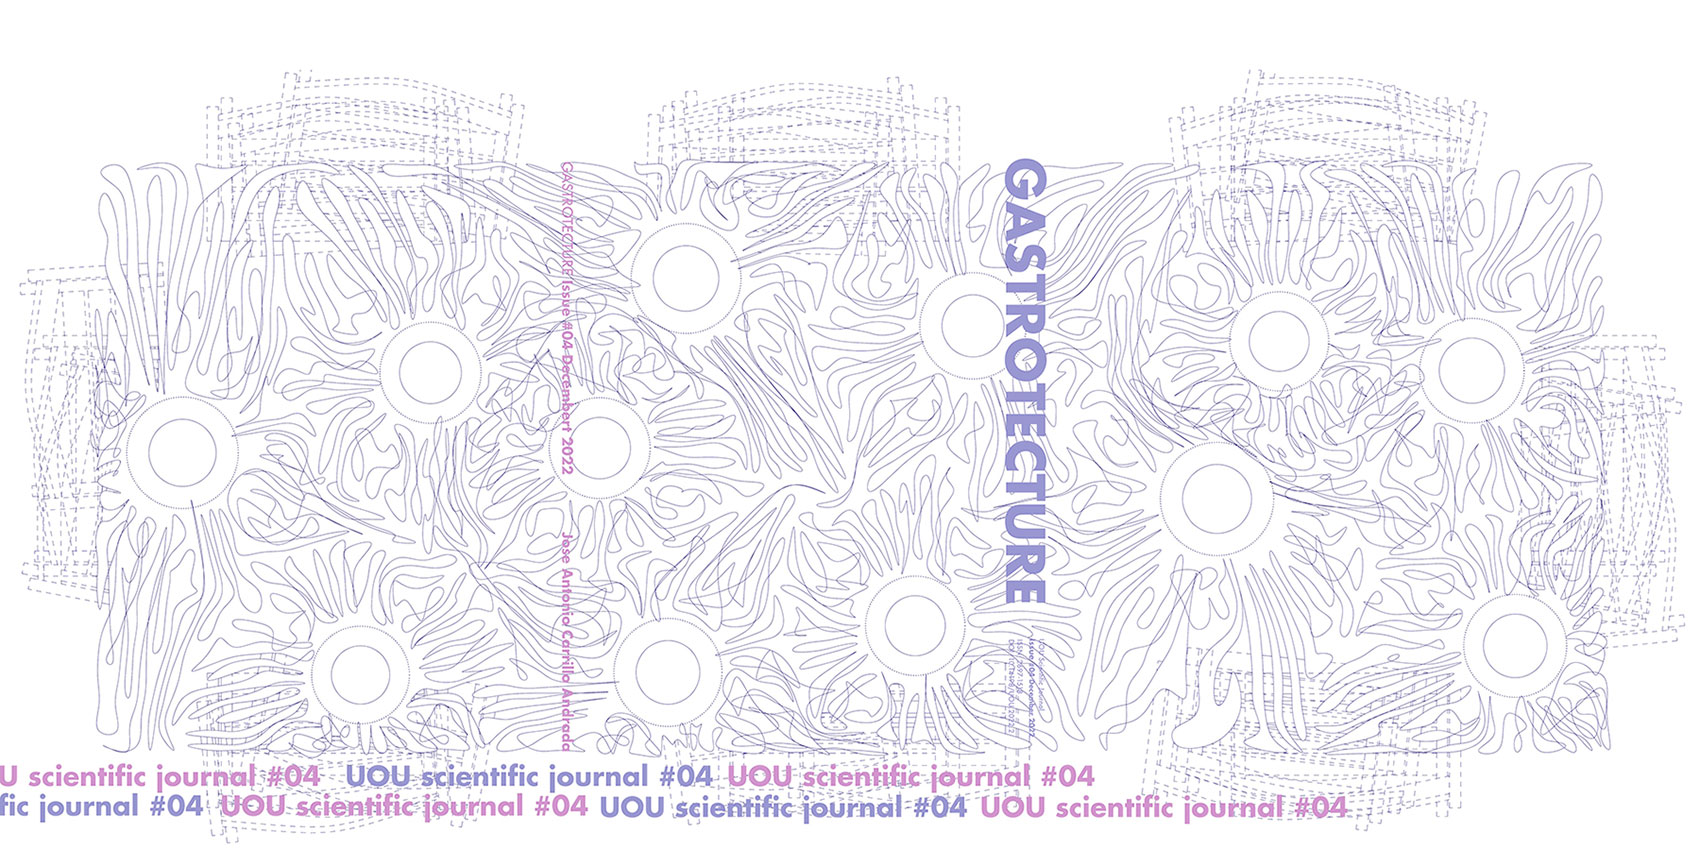 CALL: UOU scientific journal | Call #04 GASTROTECTURE